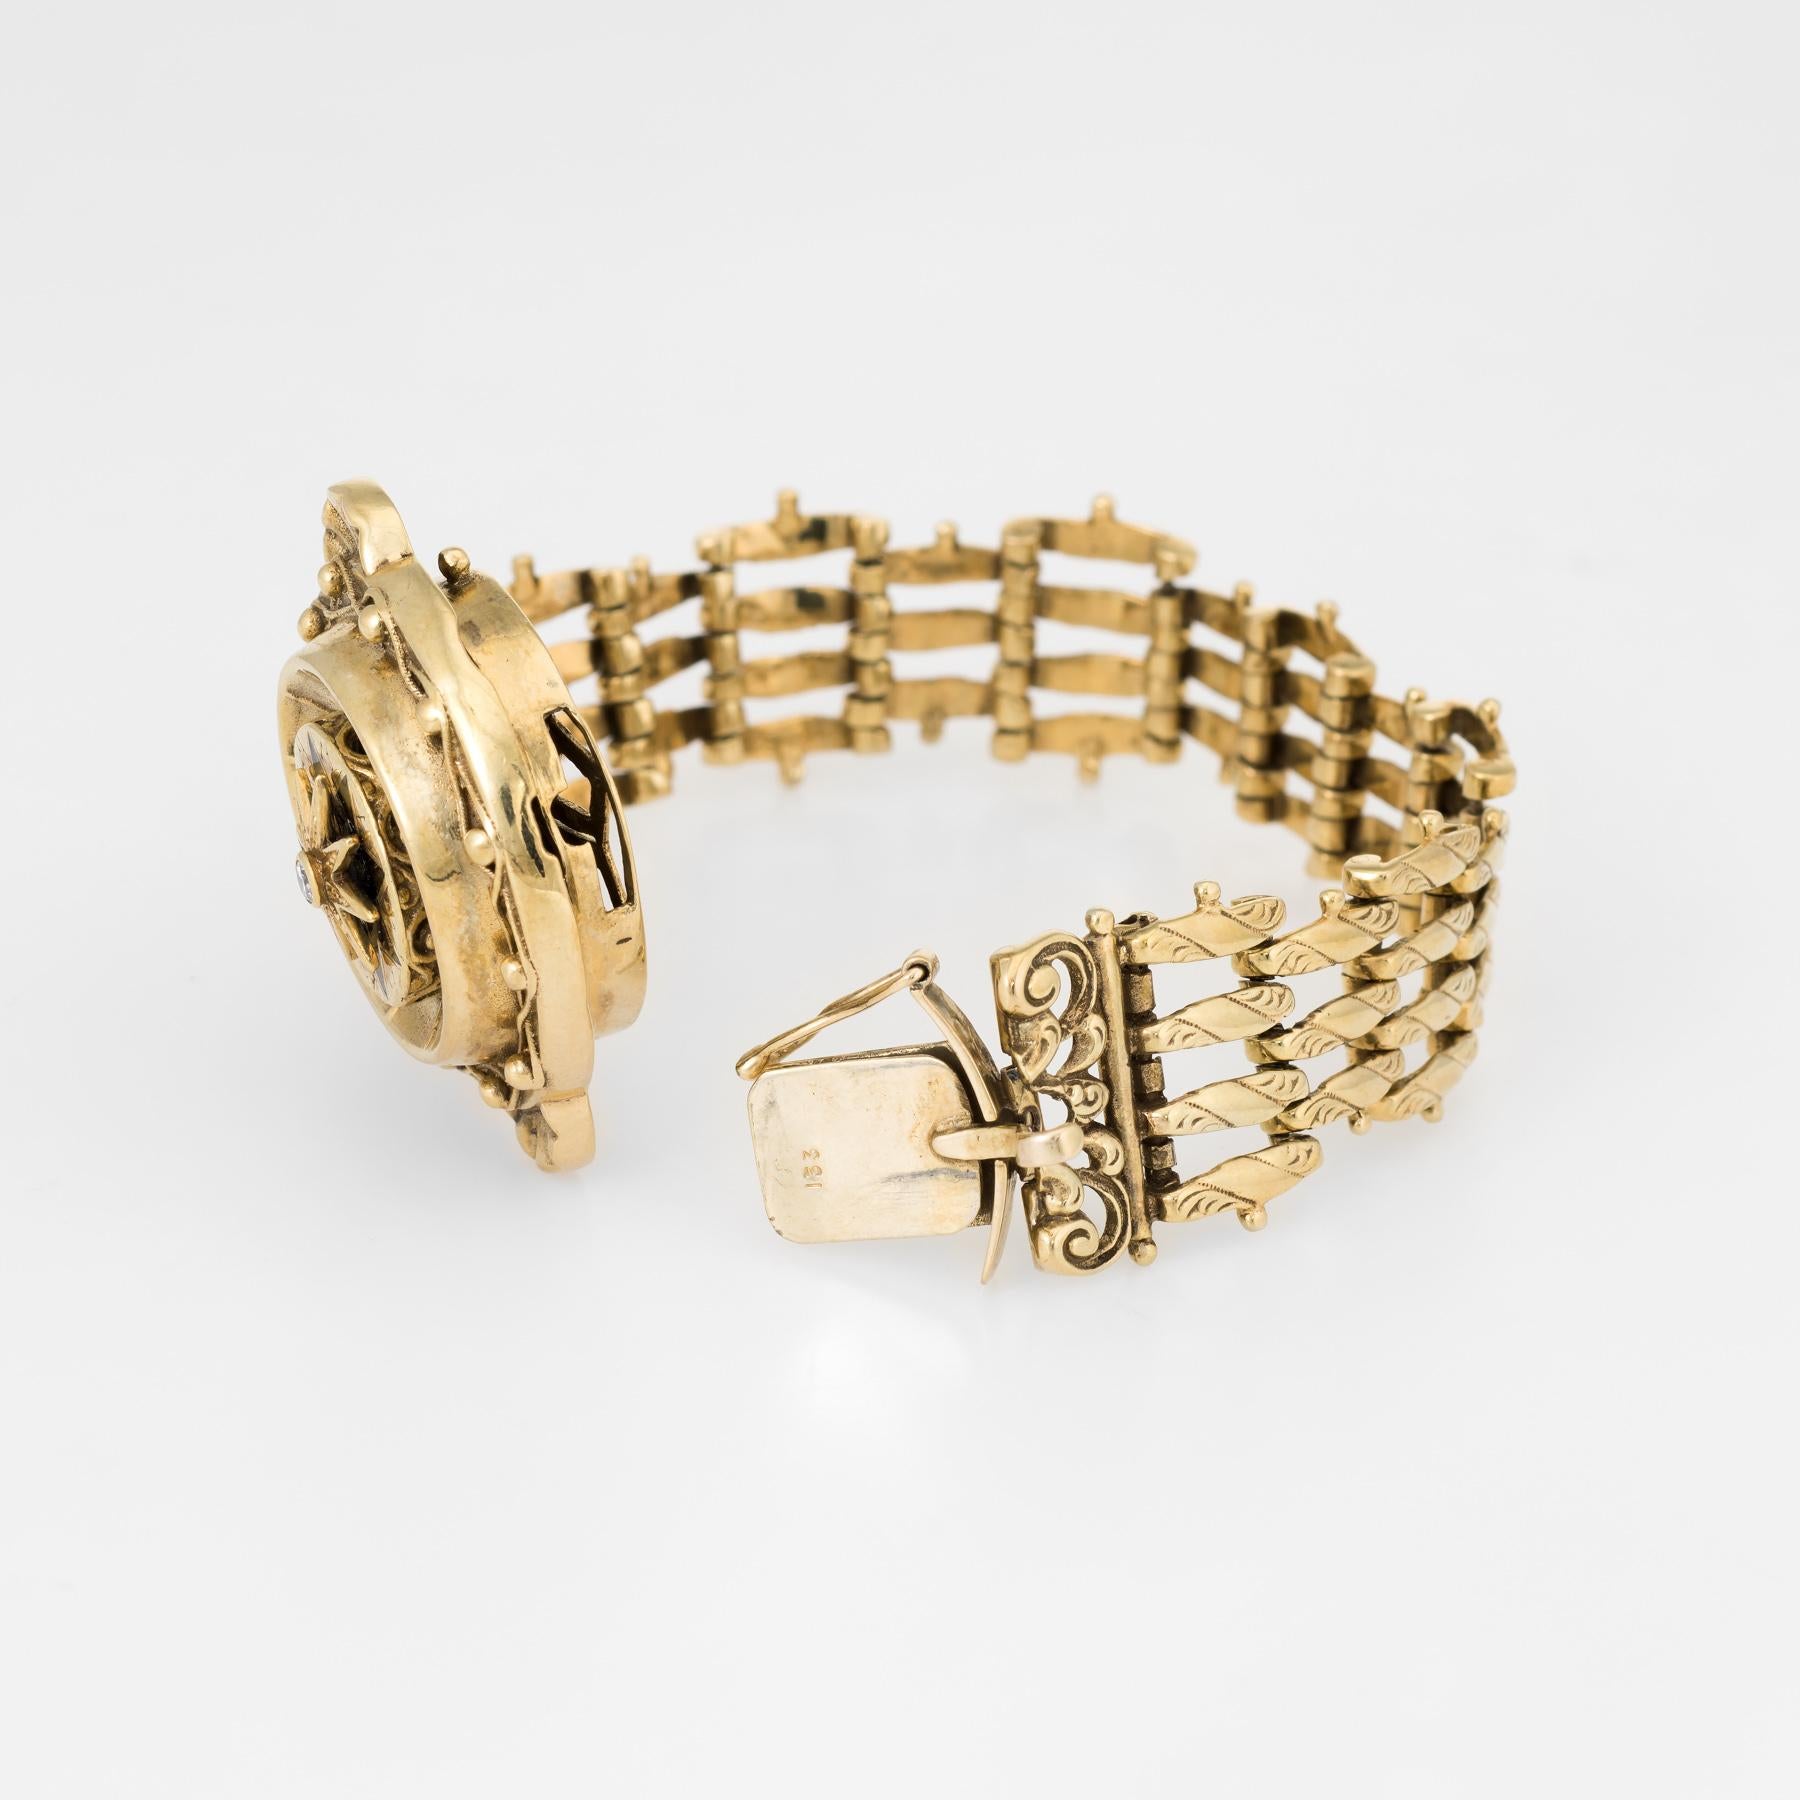 Finely detailed vintage Victorian revival bracelet (circa 1950s to 1960s), crafted in 14 karat yellow gold. 

One estimated 0.07 carat round brilliant cut diamond is set into the mount (estimated at I-J color and SI2 clarity). The star mount